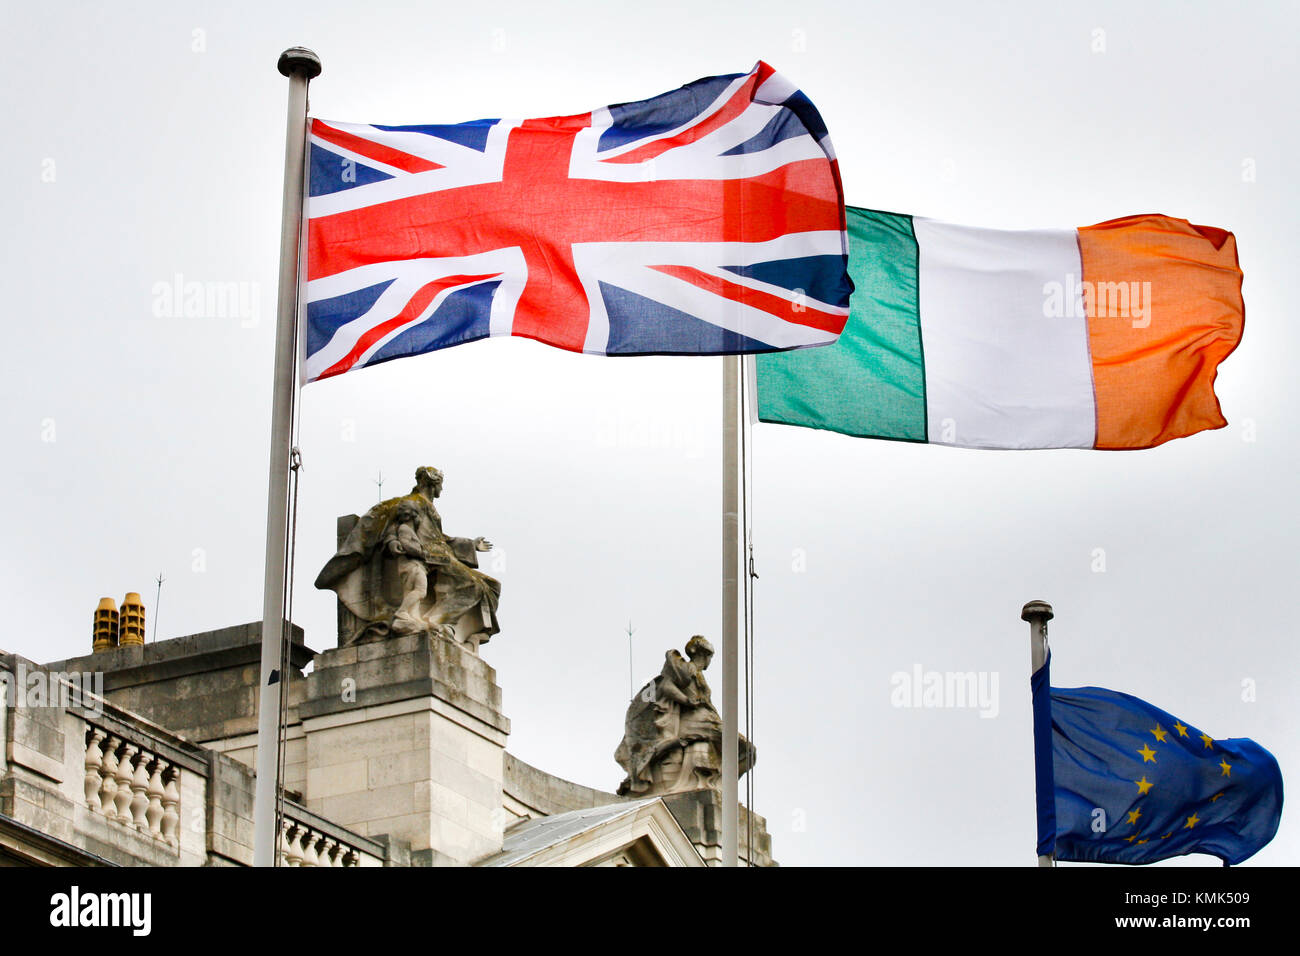 17/05/2011 'British Flag Flies in front of Government Buildings' The British Union Jack Flag flying in front of Government Buildings on the day of Queen Elizabeth IIs visit. The Queen will land at Casement Aerodrome at around noon today, and will then travel to Aras an Uachtarain for a ceremonial welcome. She will plant a tree to mark her visit and have lunch with President McAleese. This afternoon the Queen will carry out one of the most significant engagements of the trip, a visit to the Garden of Remembrance, where she will lay a wreath at the memorial, which commemorates those who died in  Stock Photo